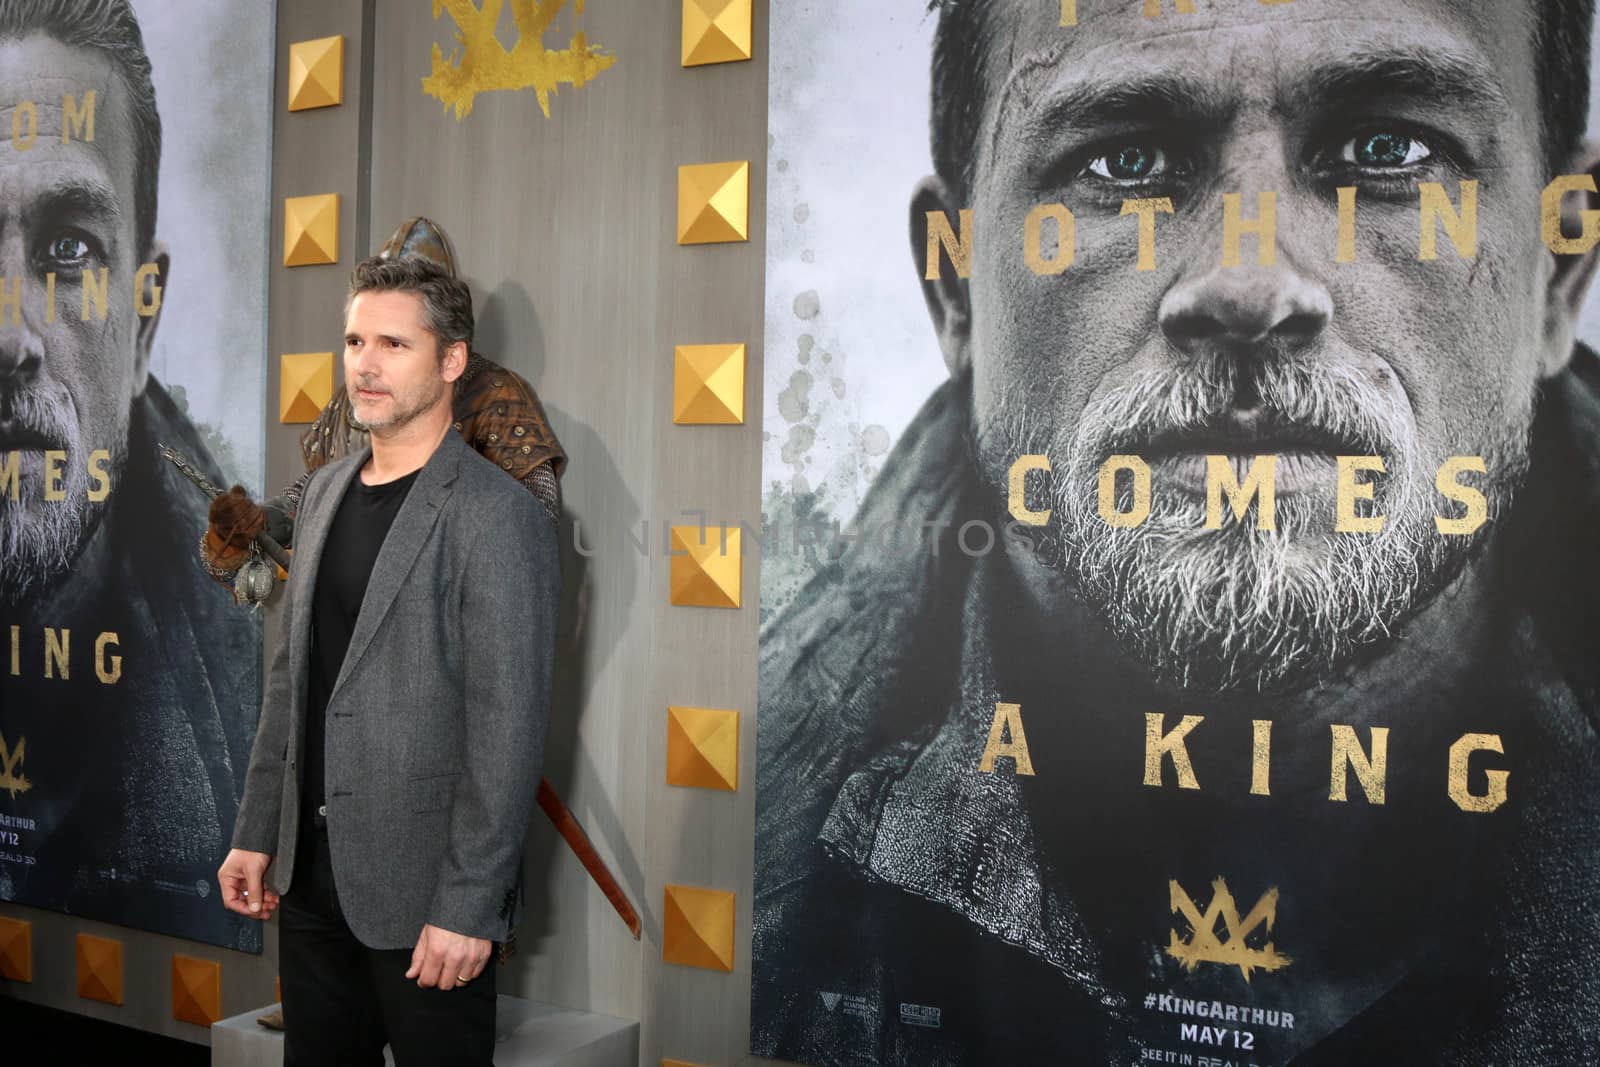 Eric Bana
at the "King Arthur Legend of the Sword" World Premiere, TCL Chinese Theater IMAX, Hollywood, CA 05-08-17/ImageCollect by ImageCollect